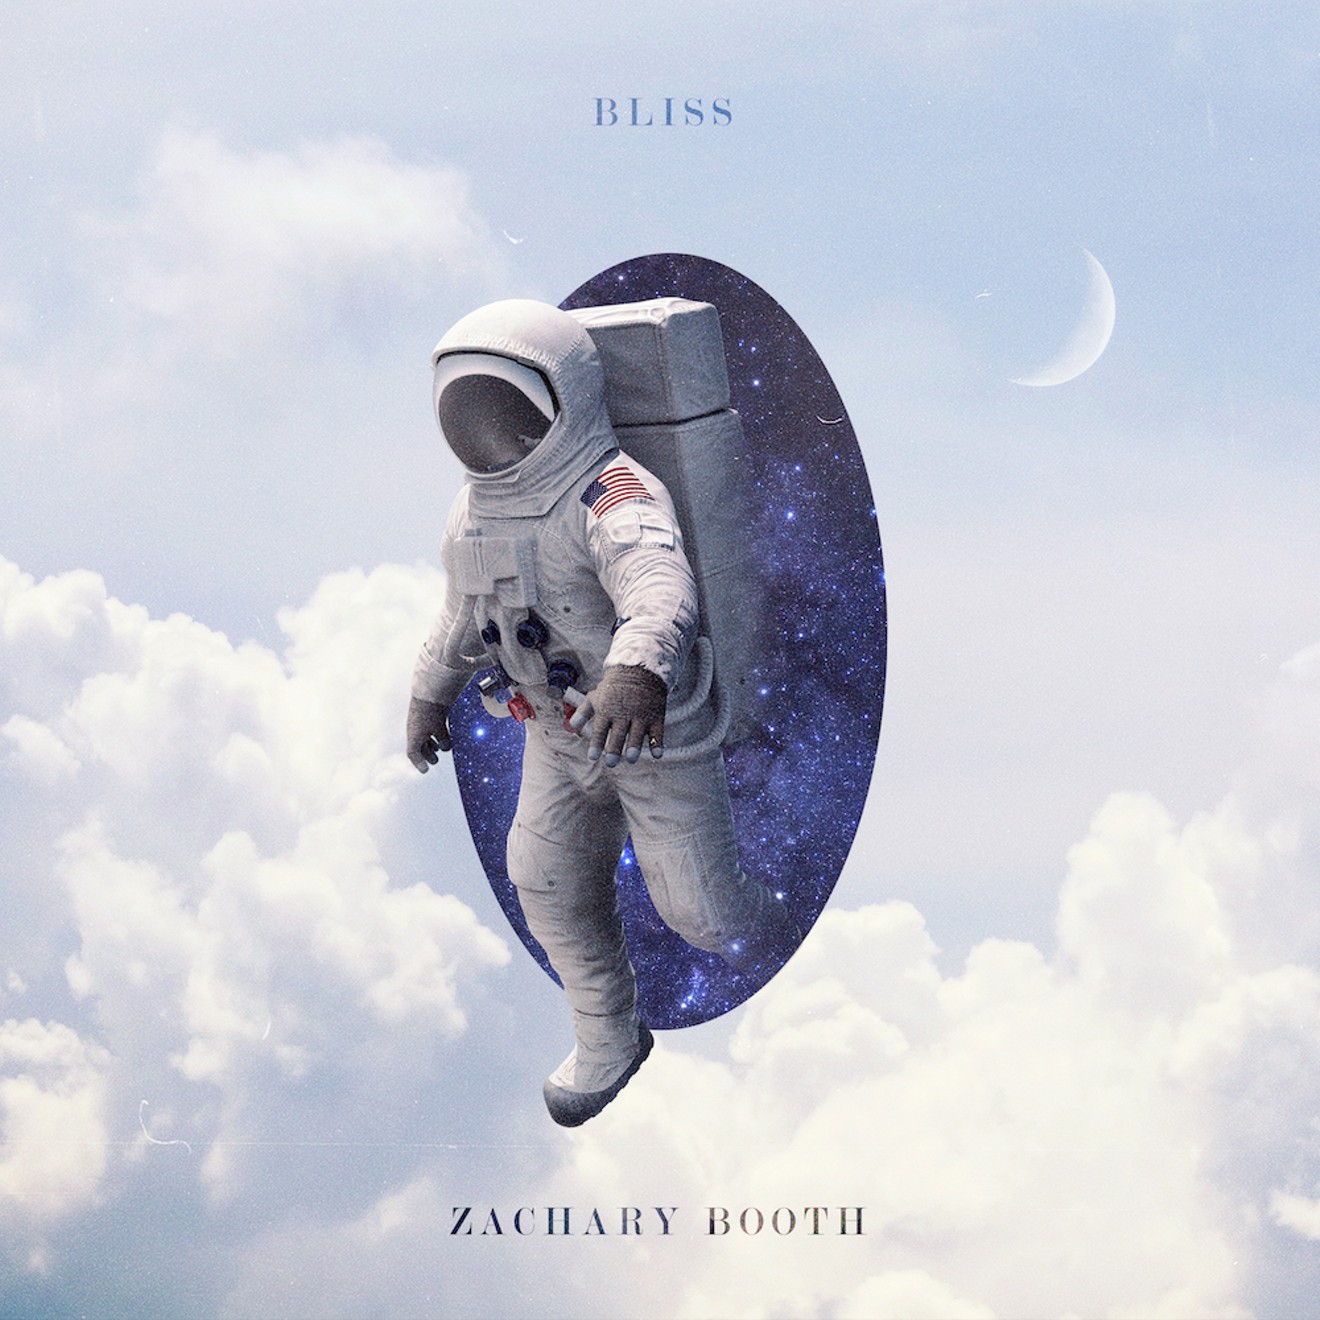 "Bliss" is the new single from Zachary Booth.